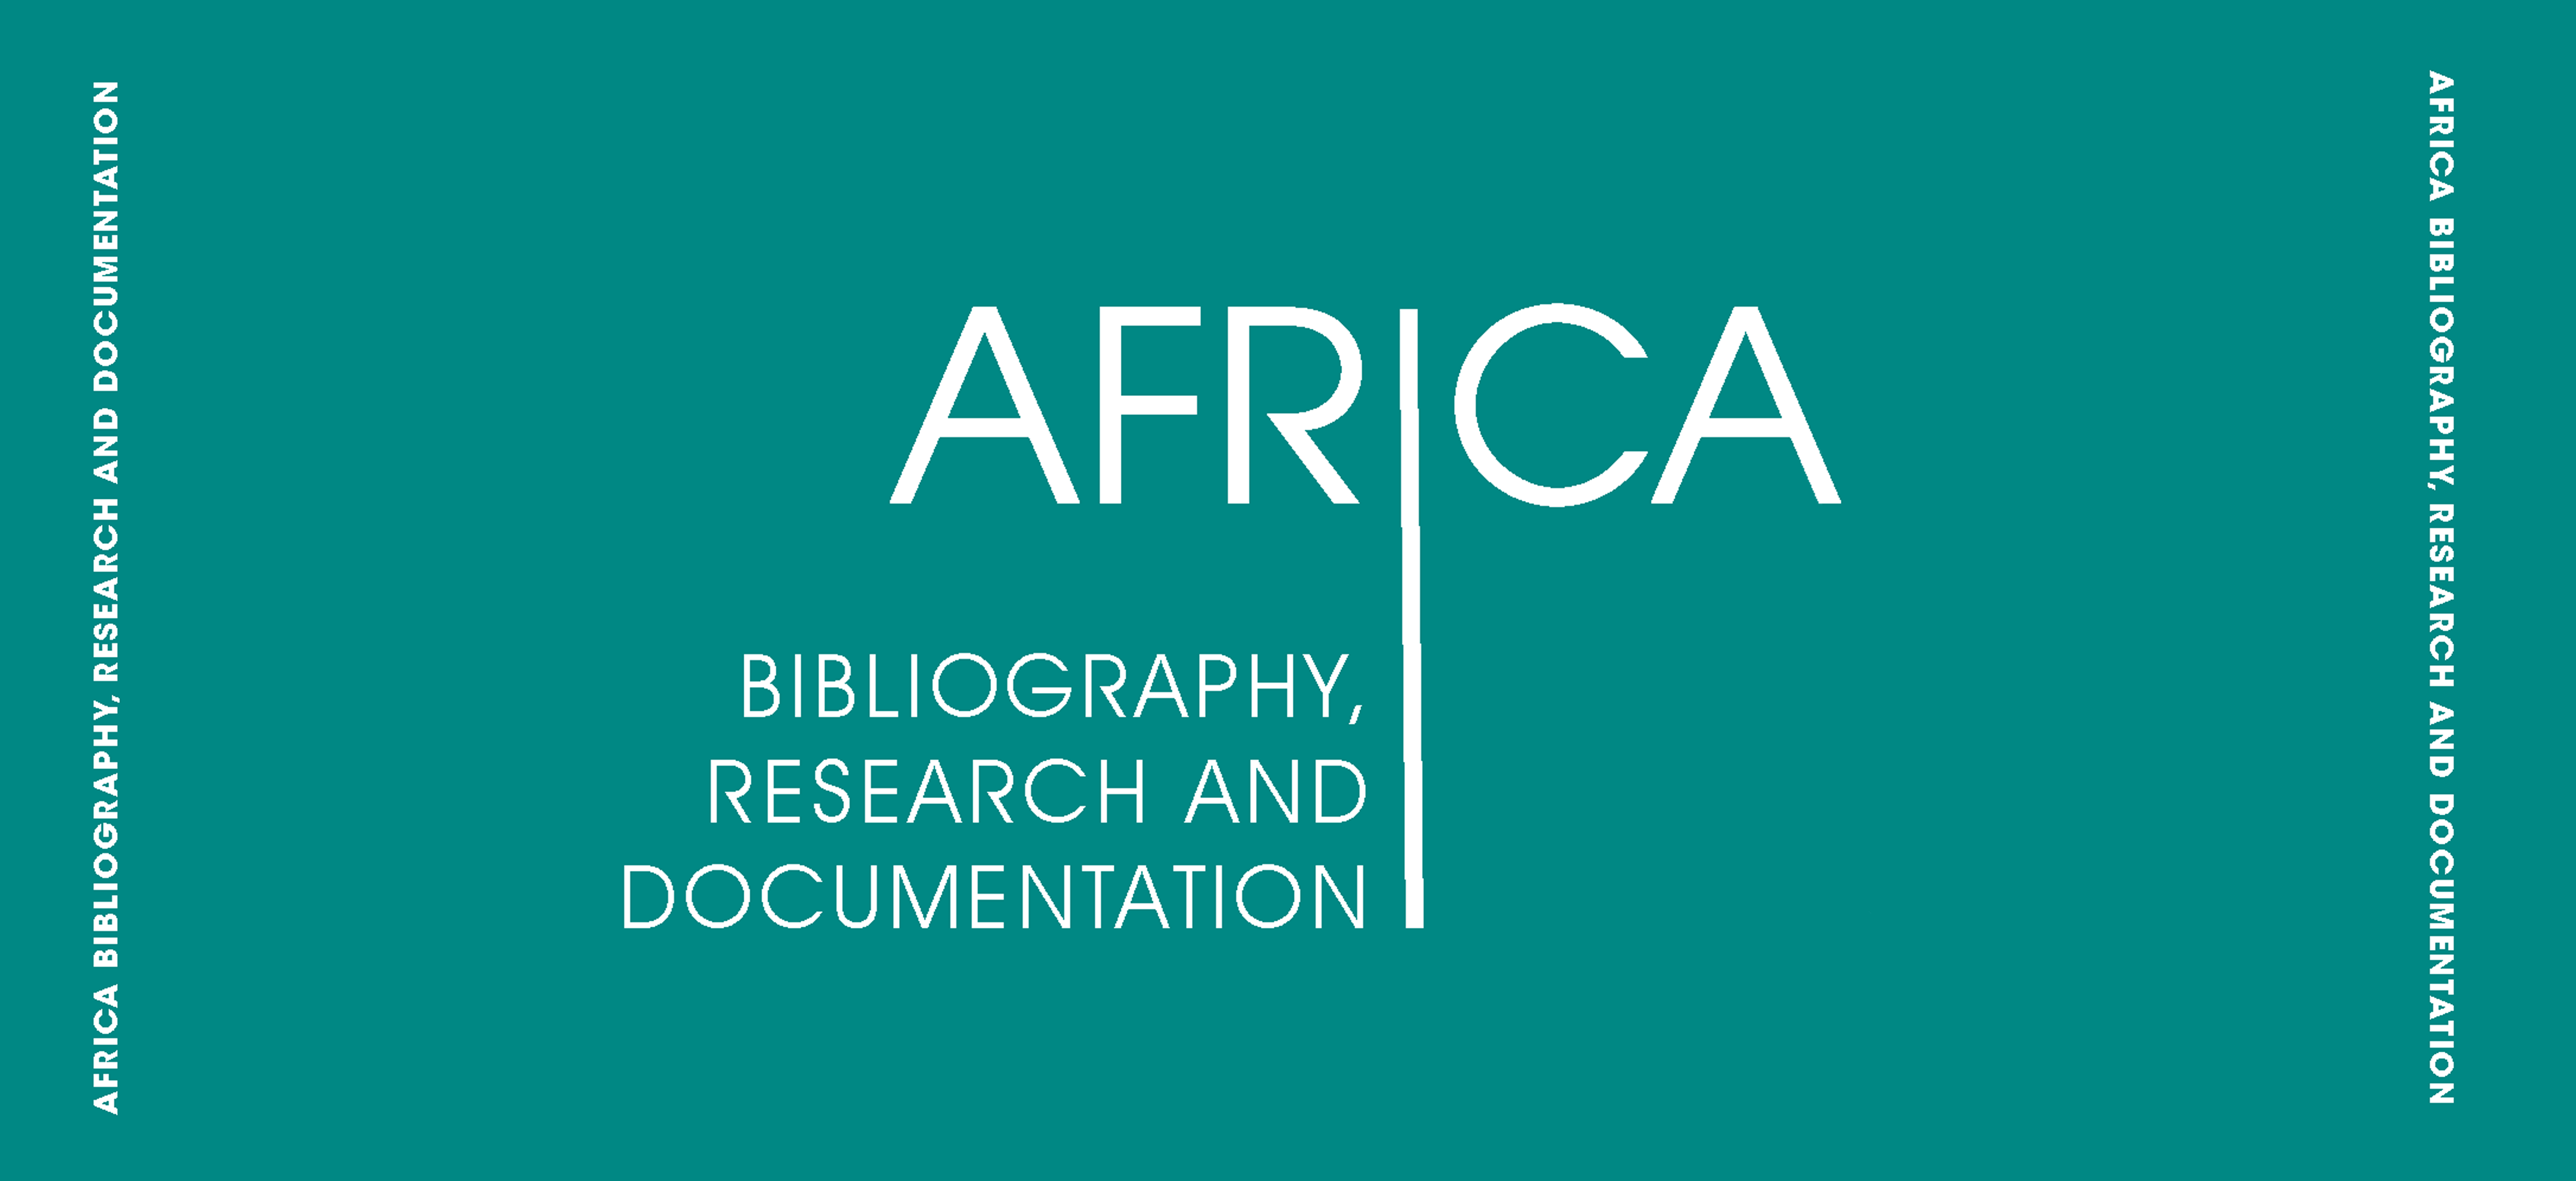 Africa Bibliography, Research and Documentation